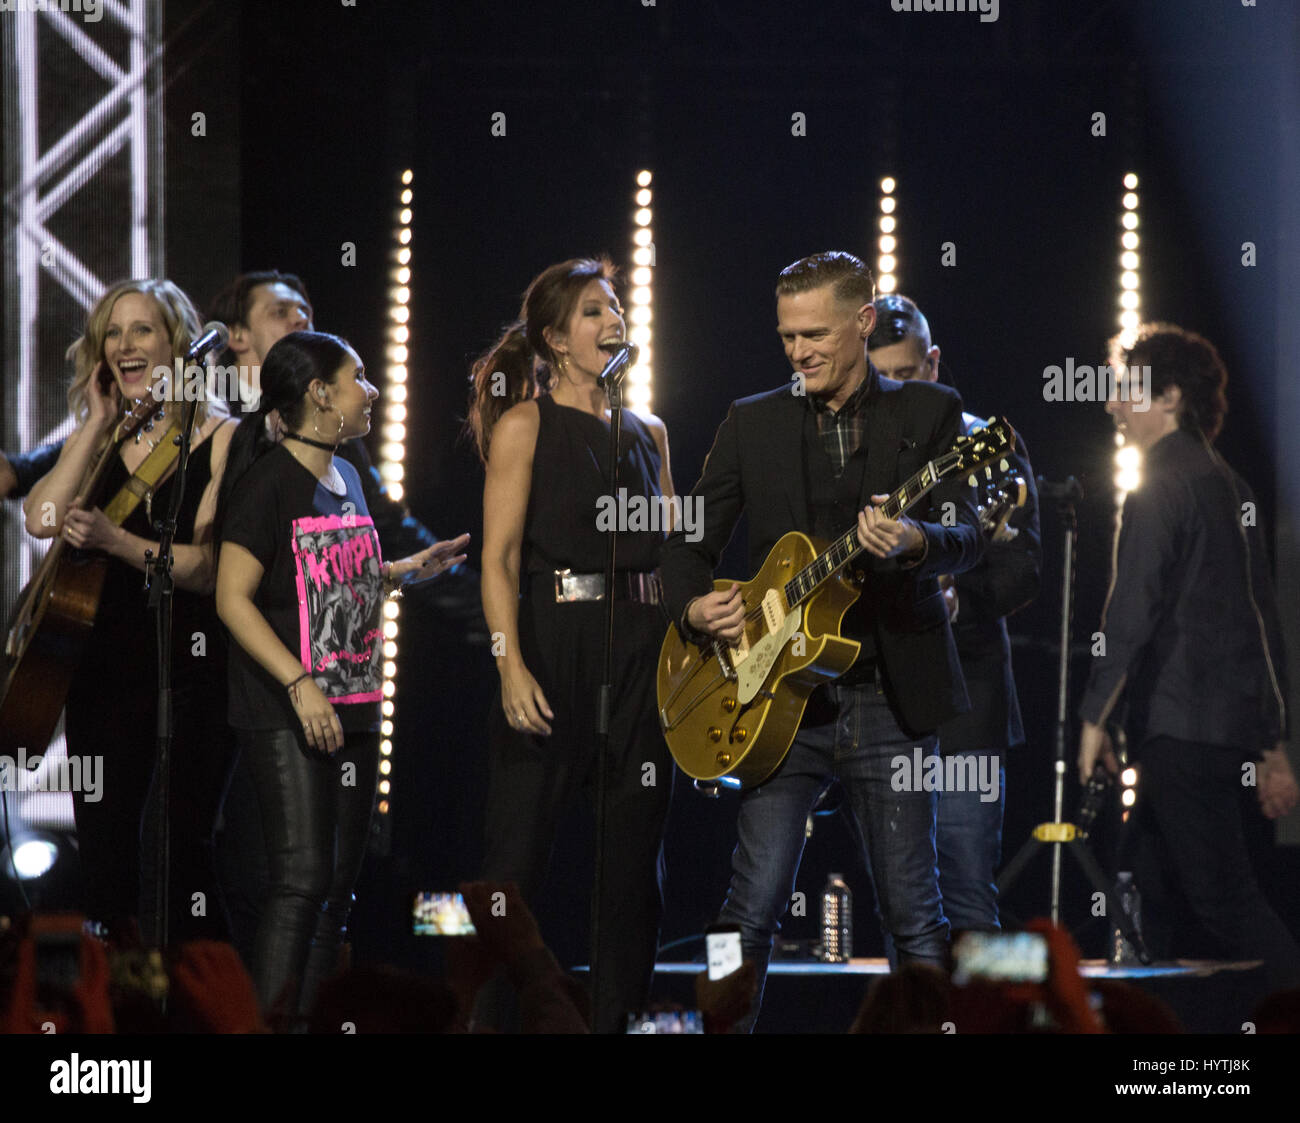 Members of Arkells, Billy Talent, july Talk and Strumbellas join Sarah McLachlan, Alessia Cara, Dallas Smith and Bryan Adams for an all-star finale at Stock Photo